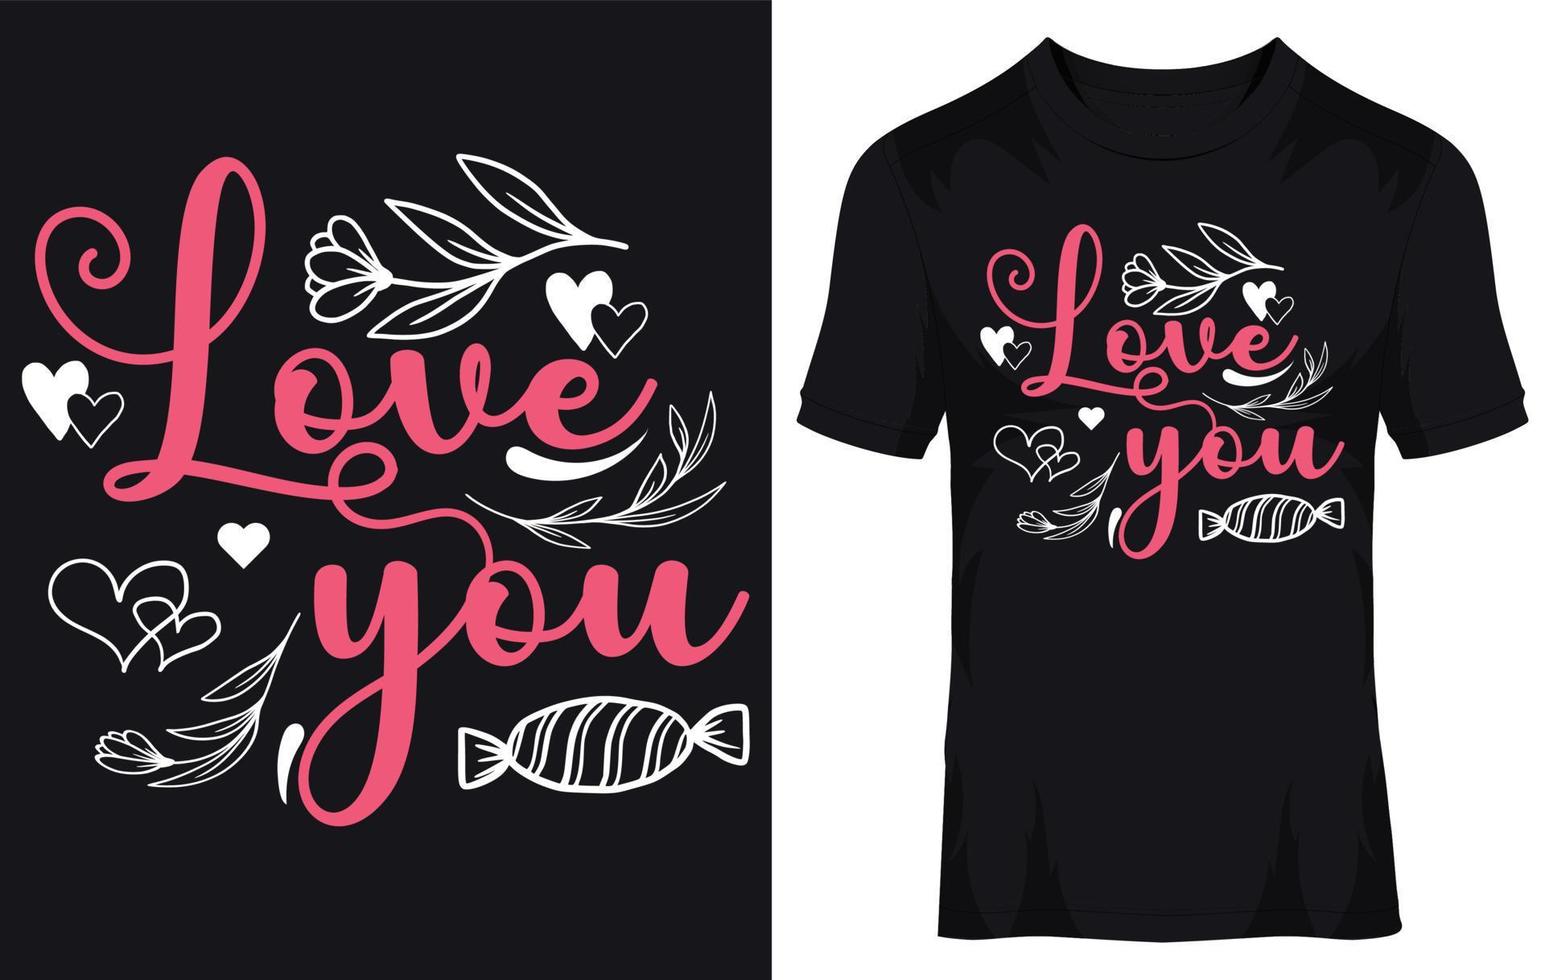 Valentines typography floral love you t-shirt design vector EPS